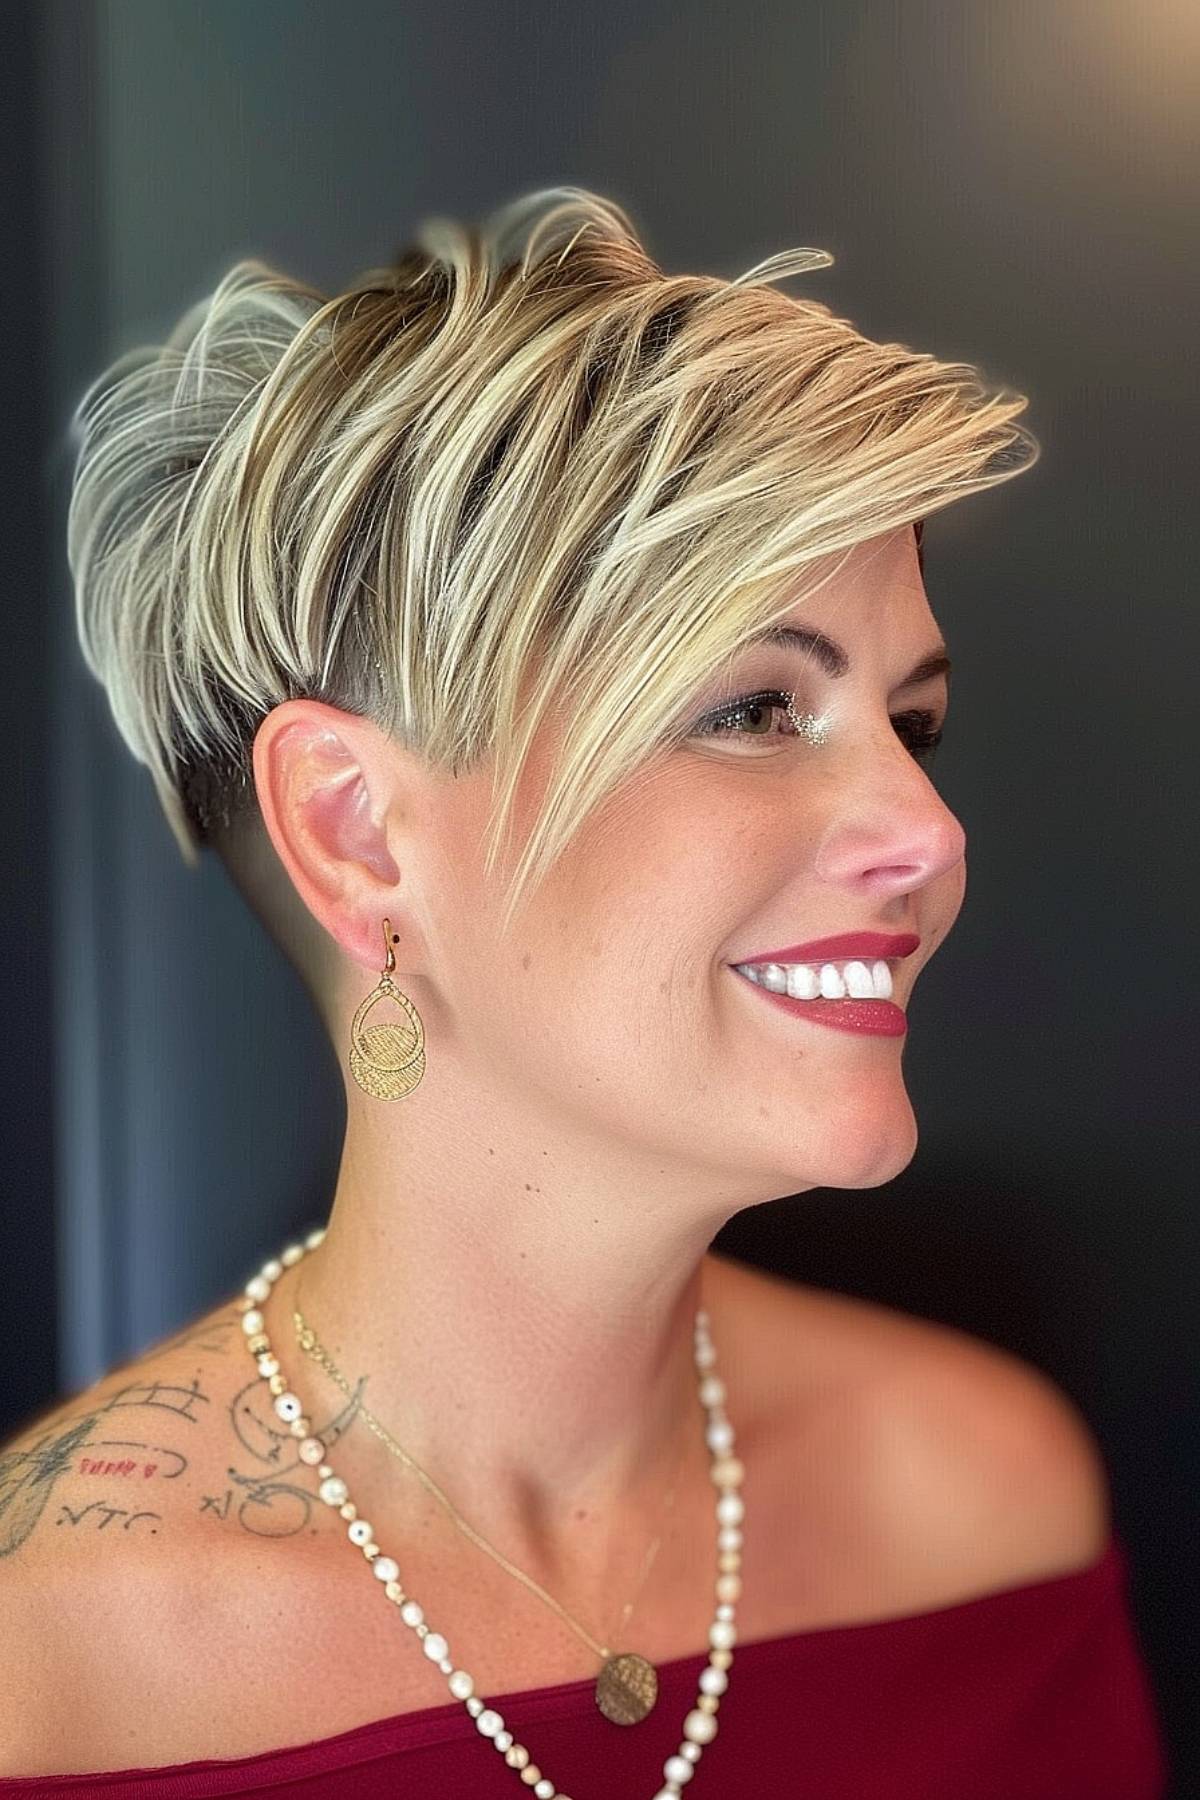 The stylish woman rocked an angled pixie cut with a subtle undercut and blonde highlights that accentuated the sharp lines of the cut.